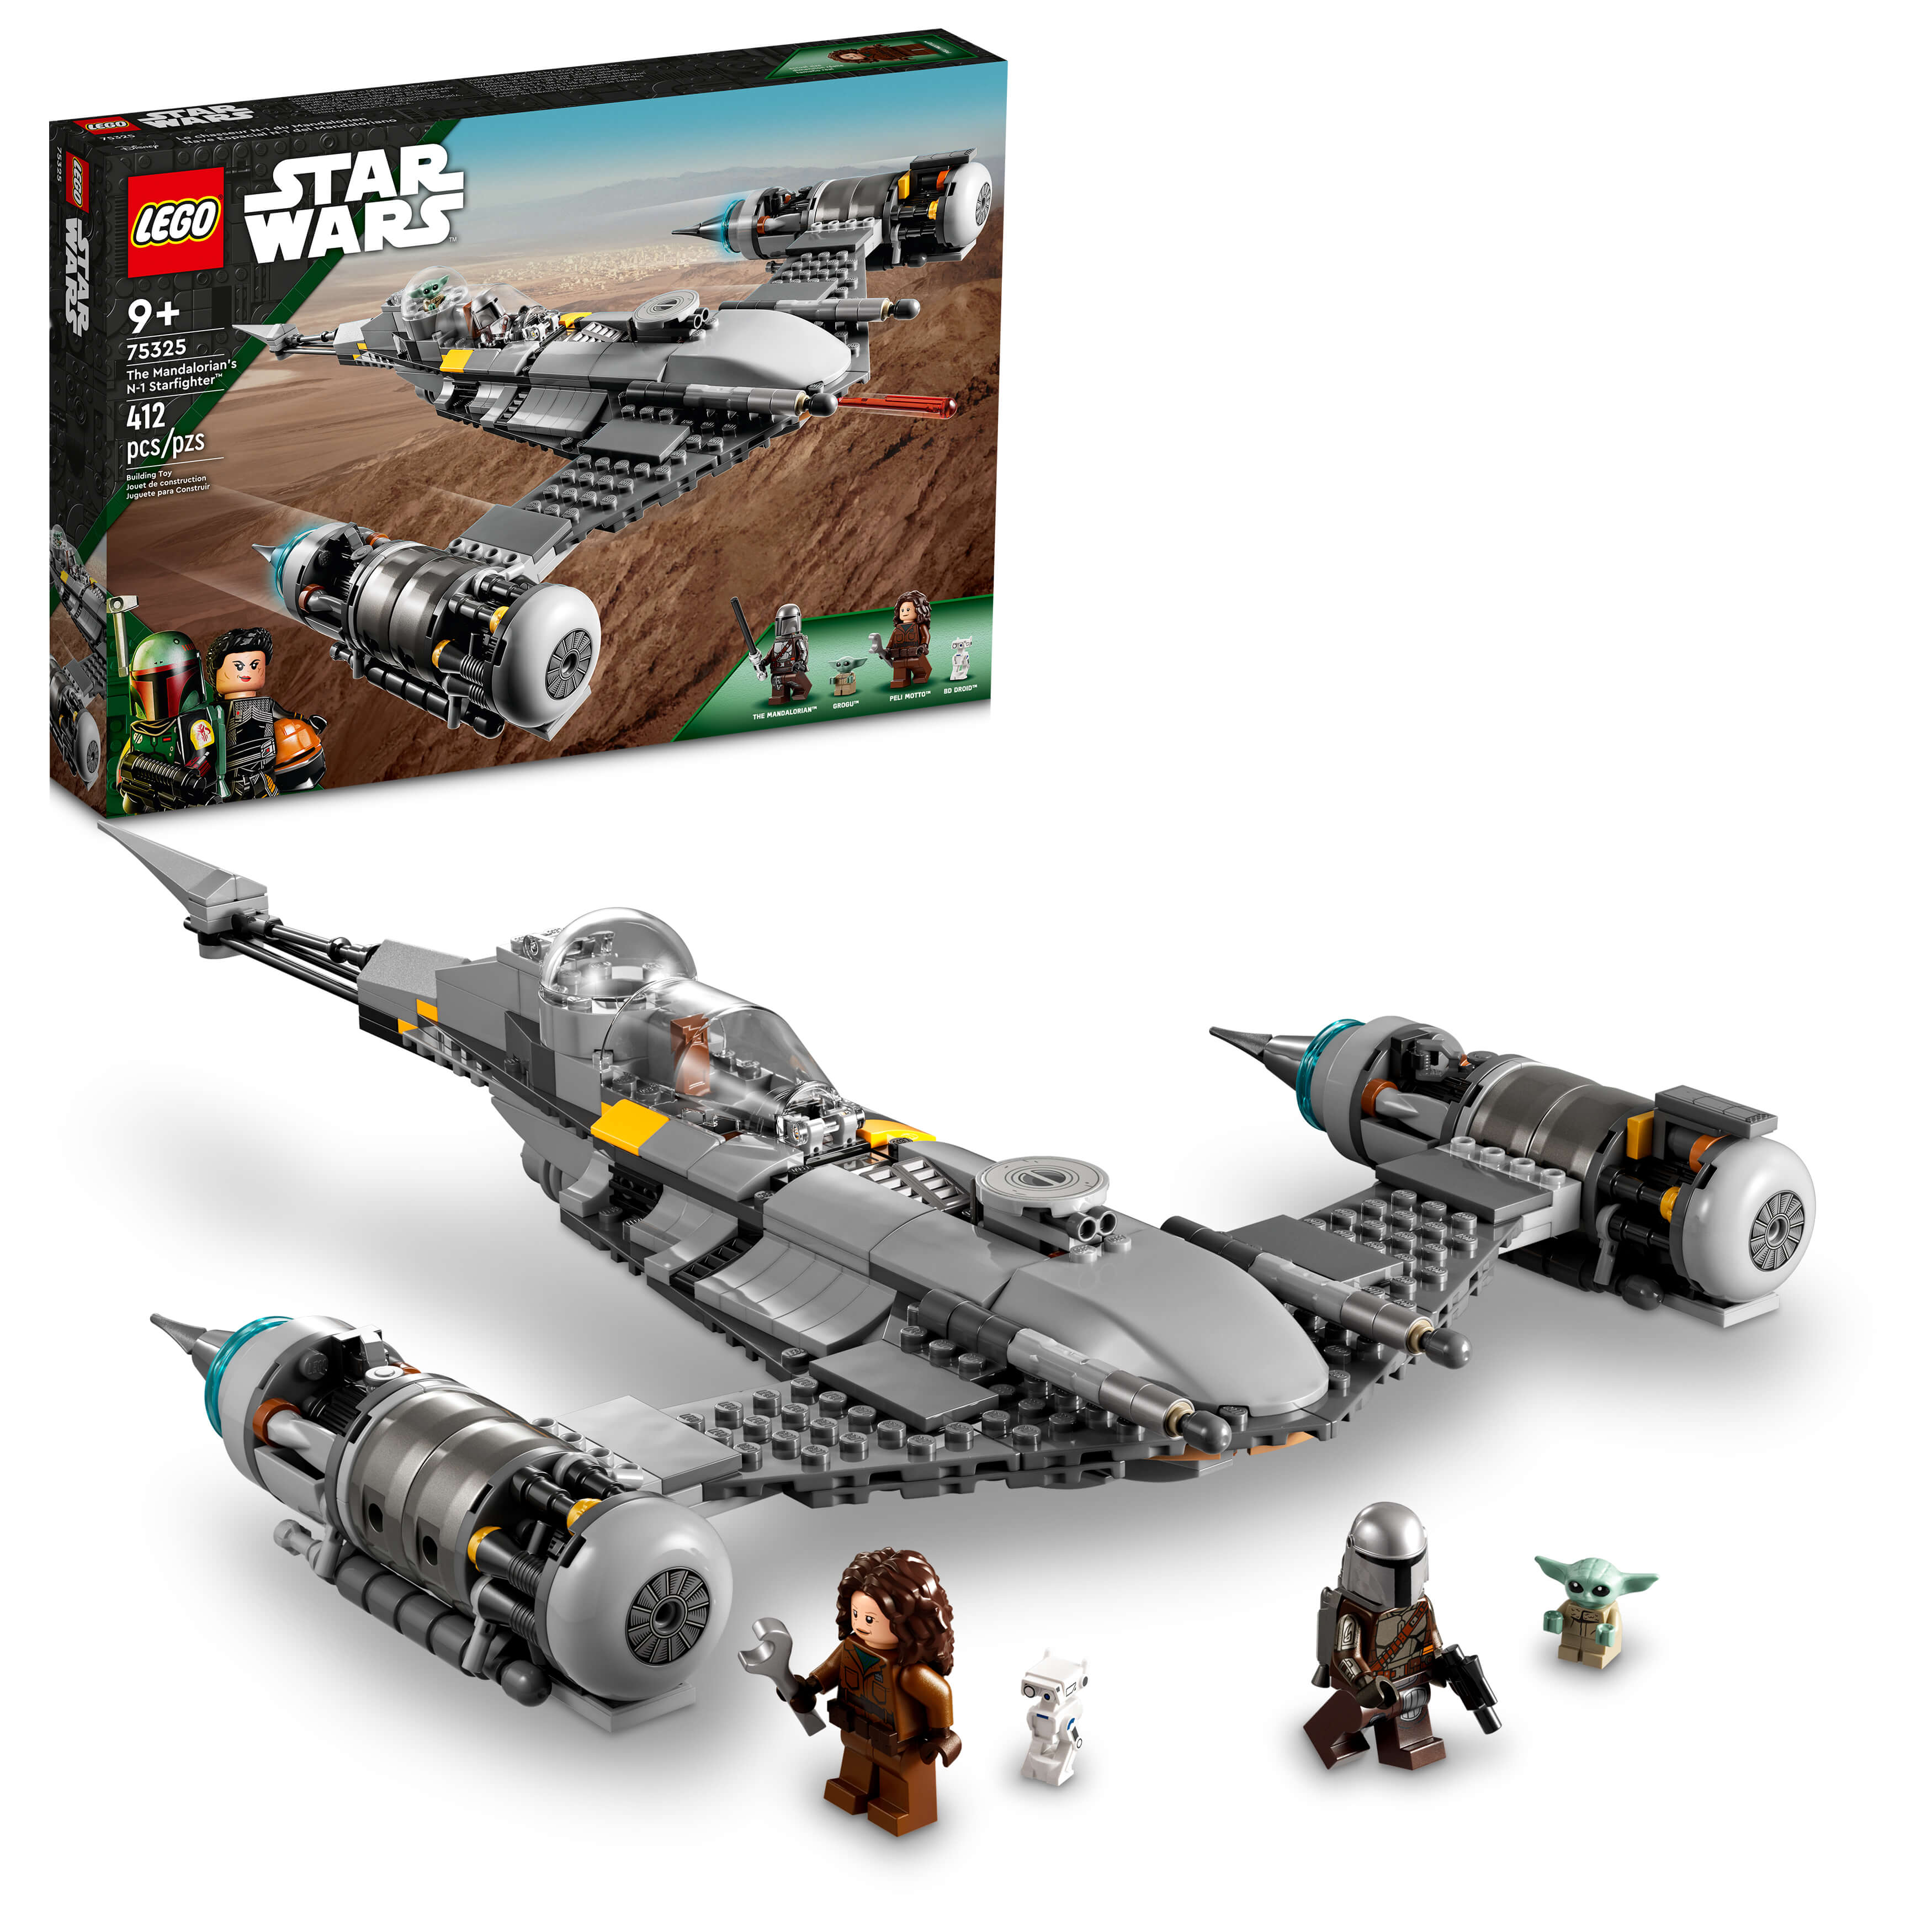 LEGO® Star Wars® The Mandalorians N-1 Starfighter 75325 Building Kit (412 Pieces)